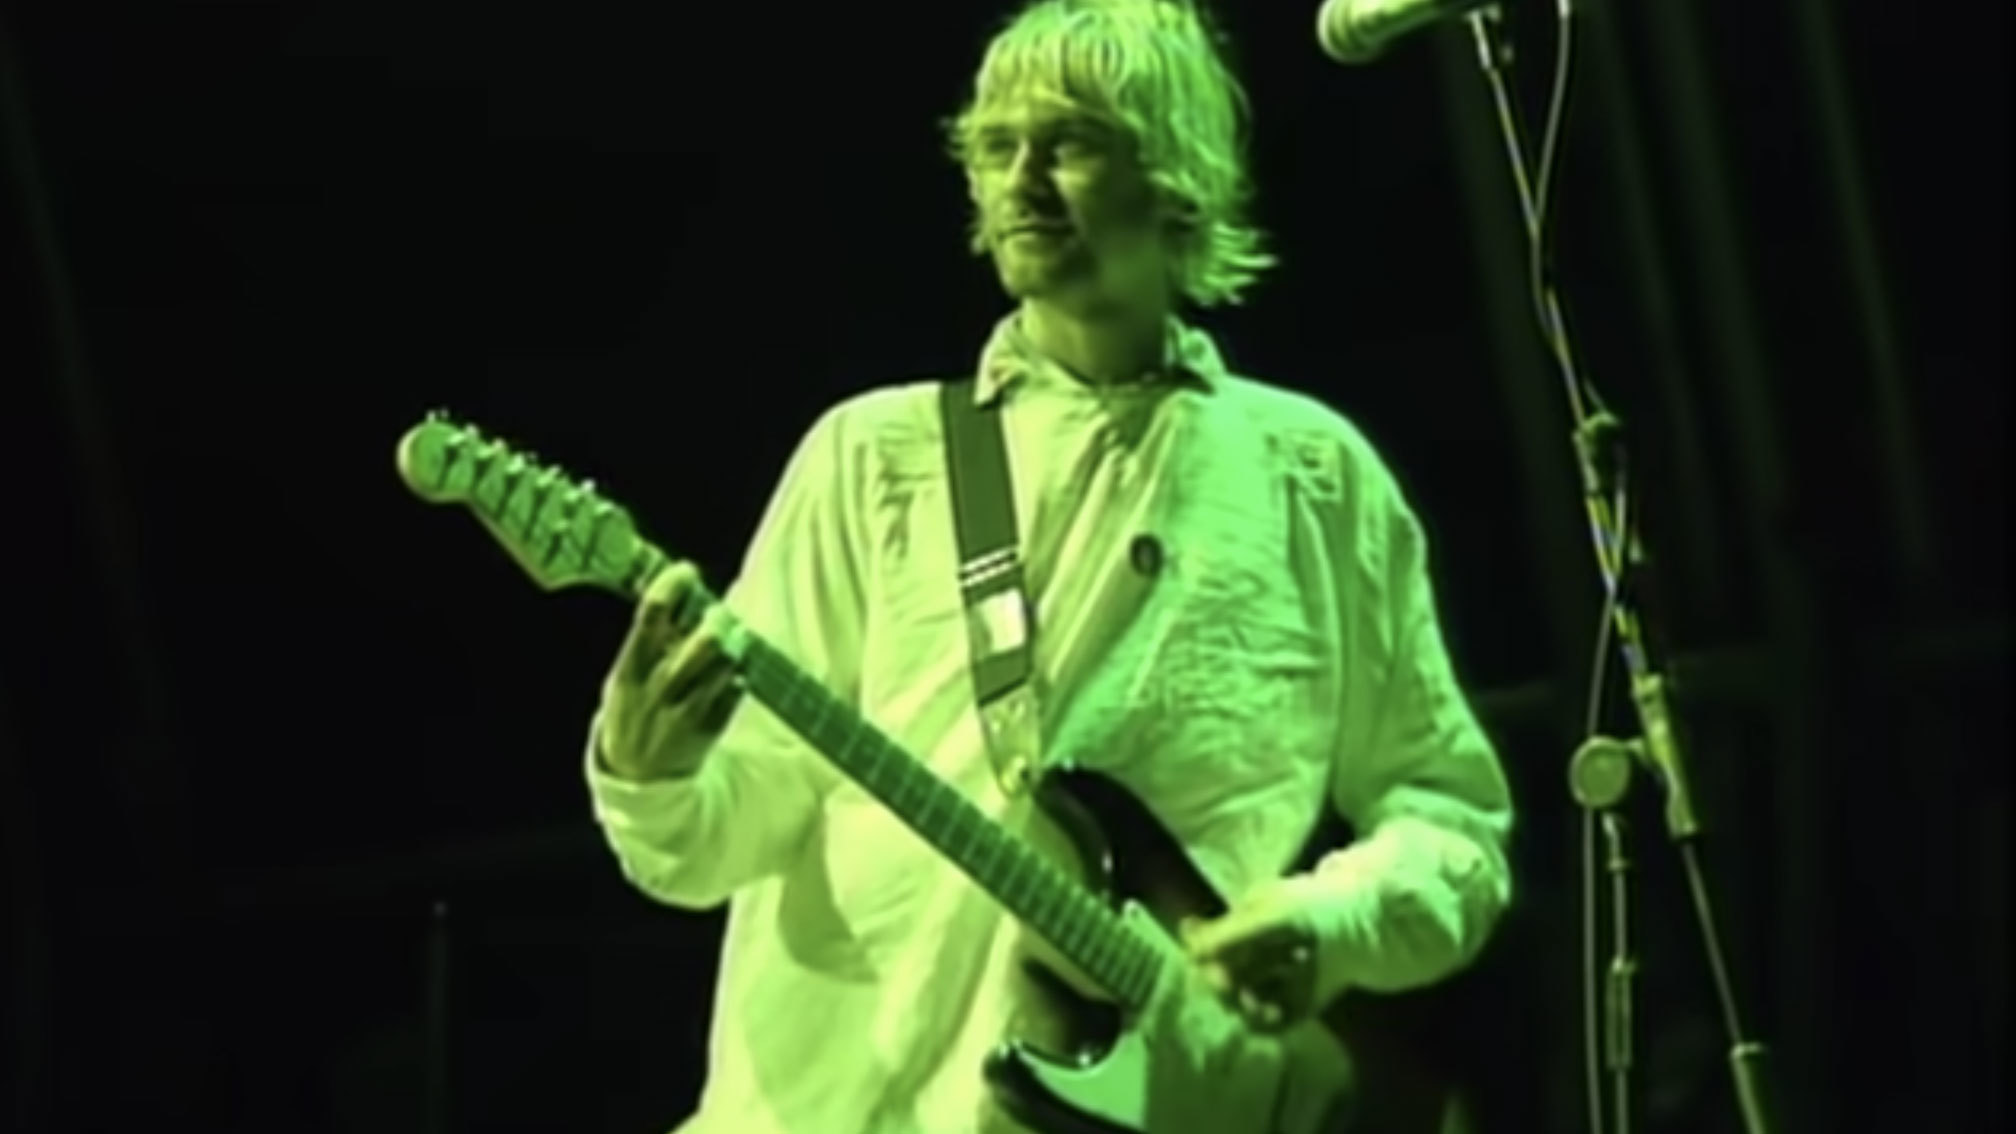 Kurt Cobain's Reading Festival Hospital Gown Is Up For… | Kerrang!